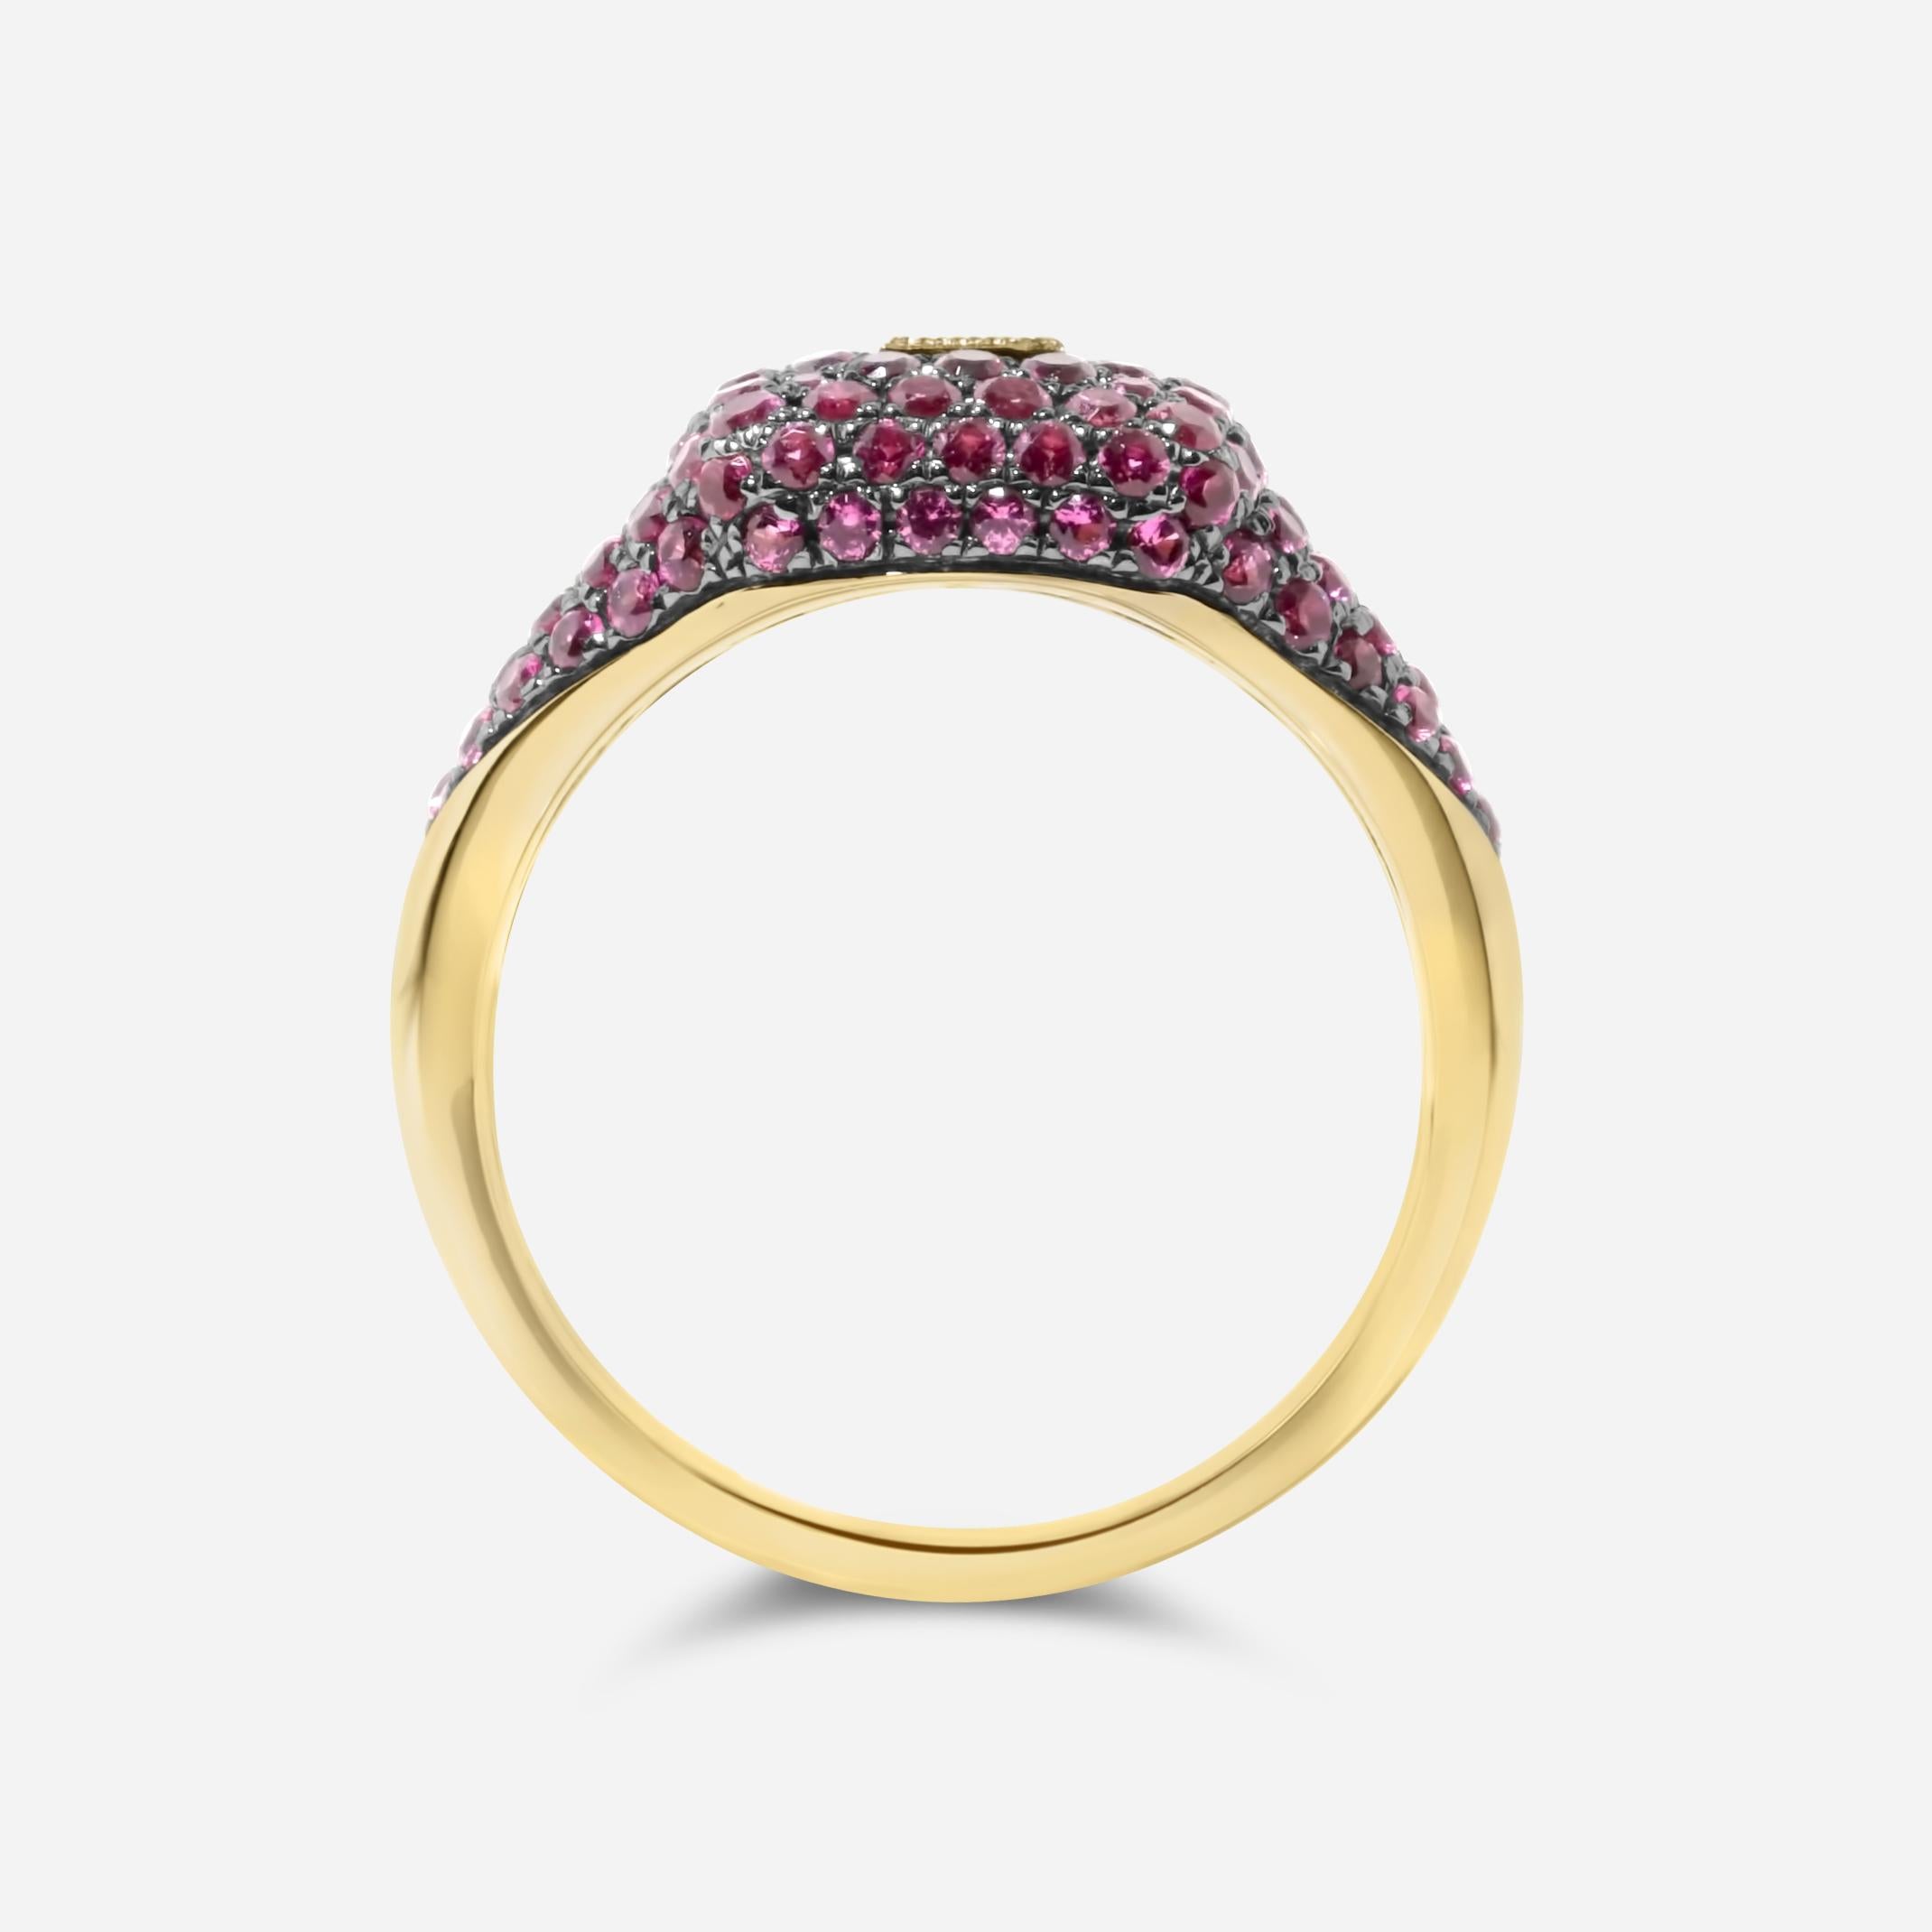 Ruby Pave Diamond Baguette Bezel Beaded 14 Karat Yellow Gold Signet Pinky Ring
14 Karat Yellow Gold
2.00 CT Rubies
0.15 cts Diamonds
Size 7, Resizable upon request 

Important Information:
Please note that this item will take 2-4 weeks to deliver -